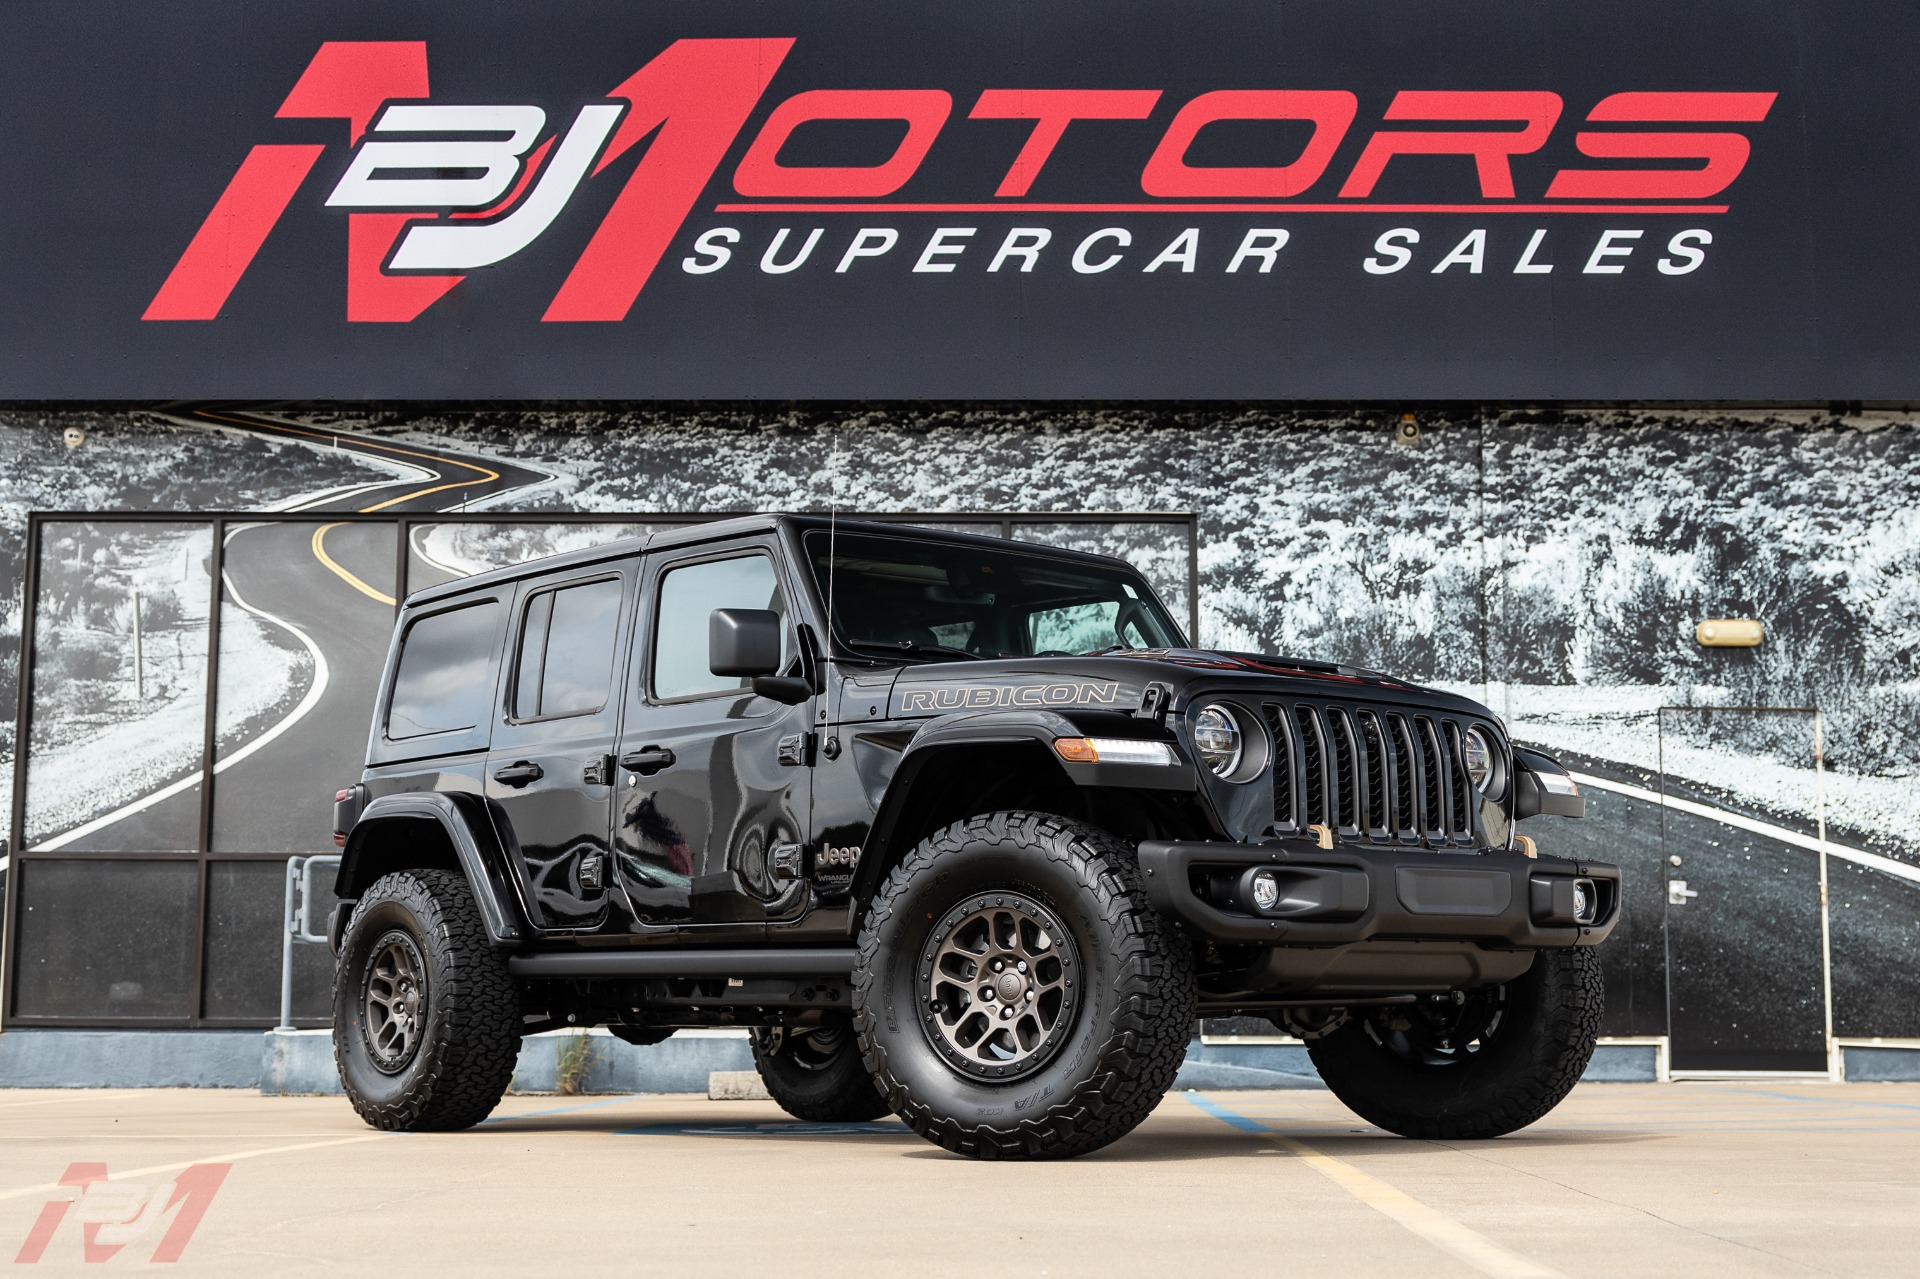 Used 2022 Jeep Wrangler Unlimited Rubicon 392 Xtreme Recon For Sale